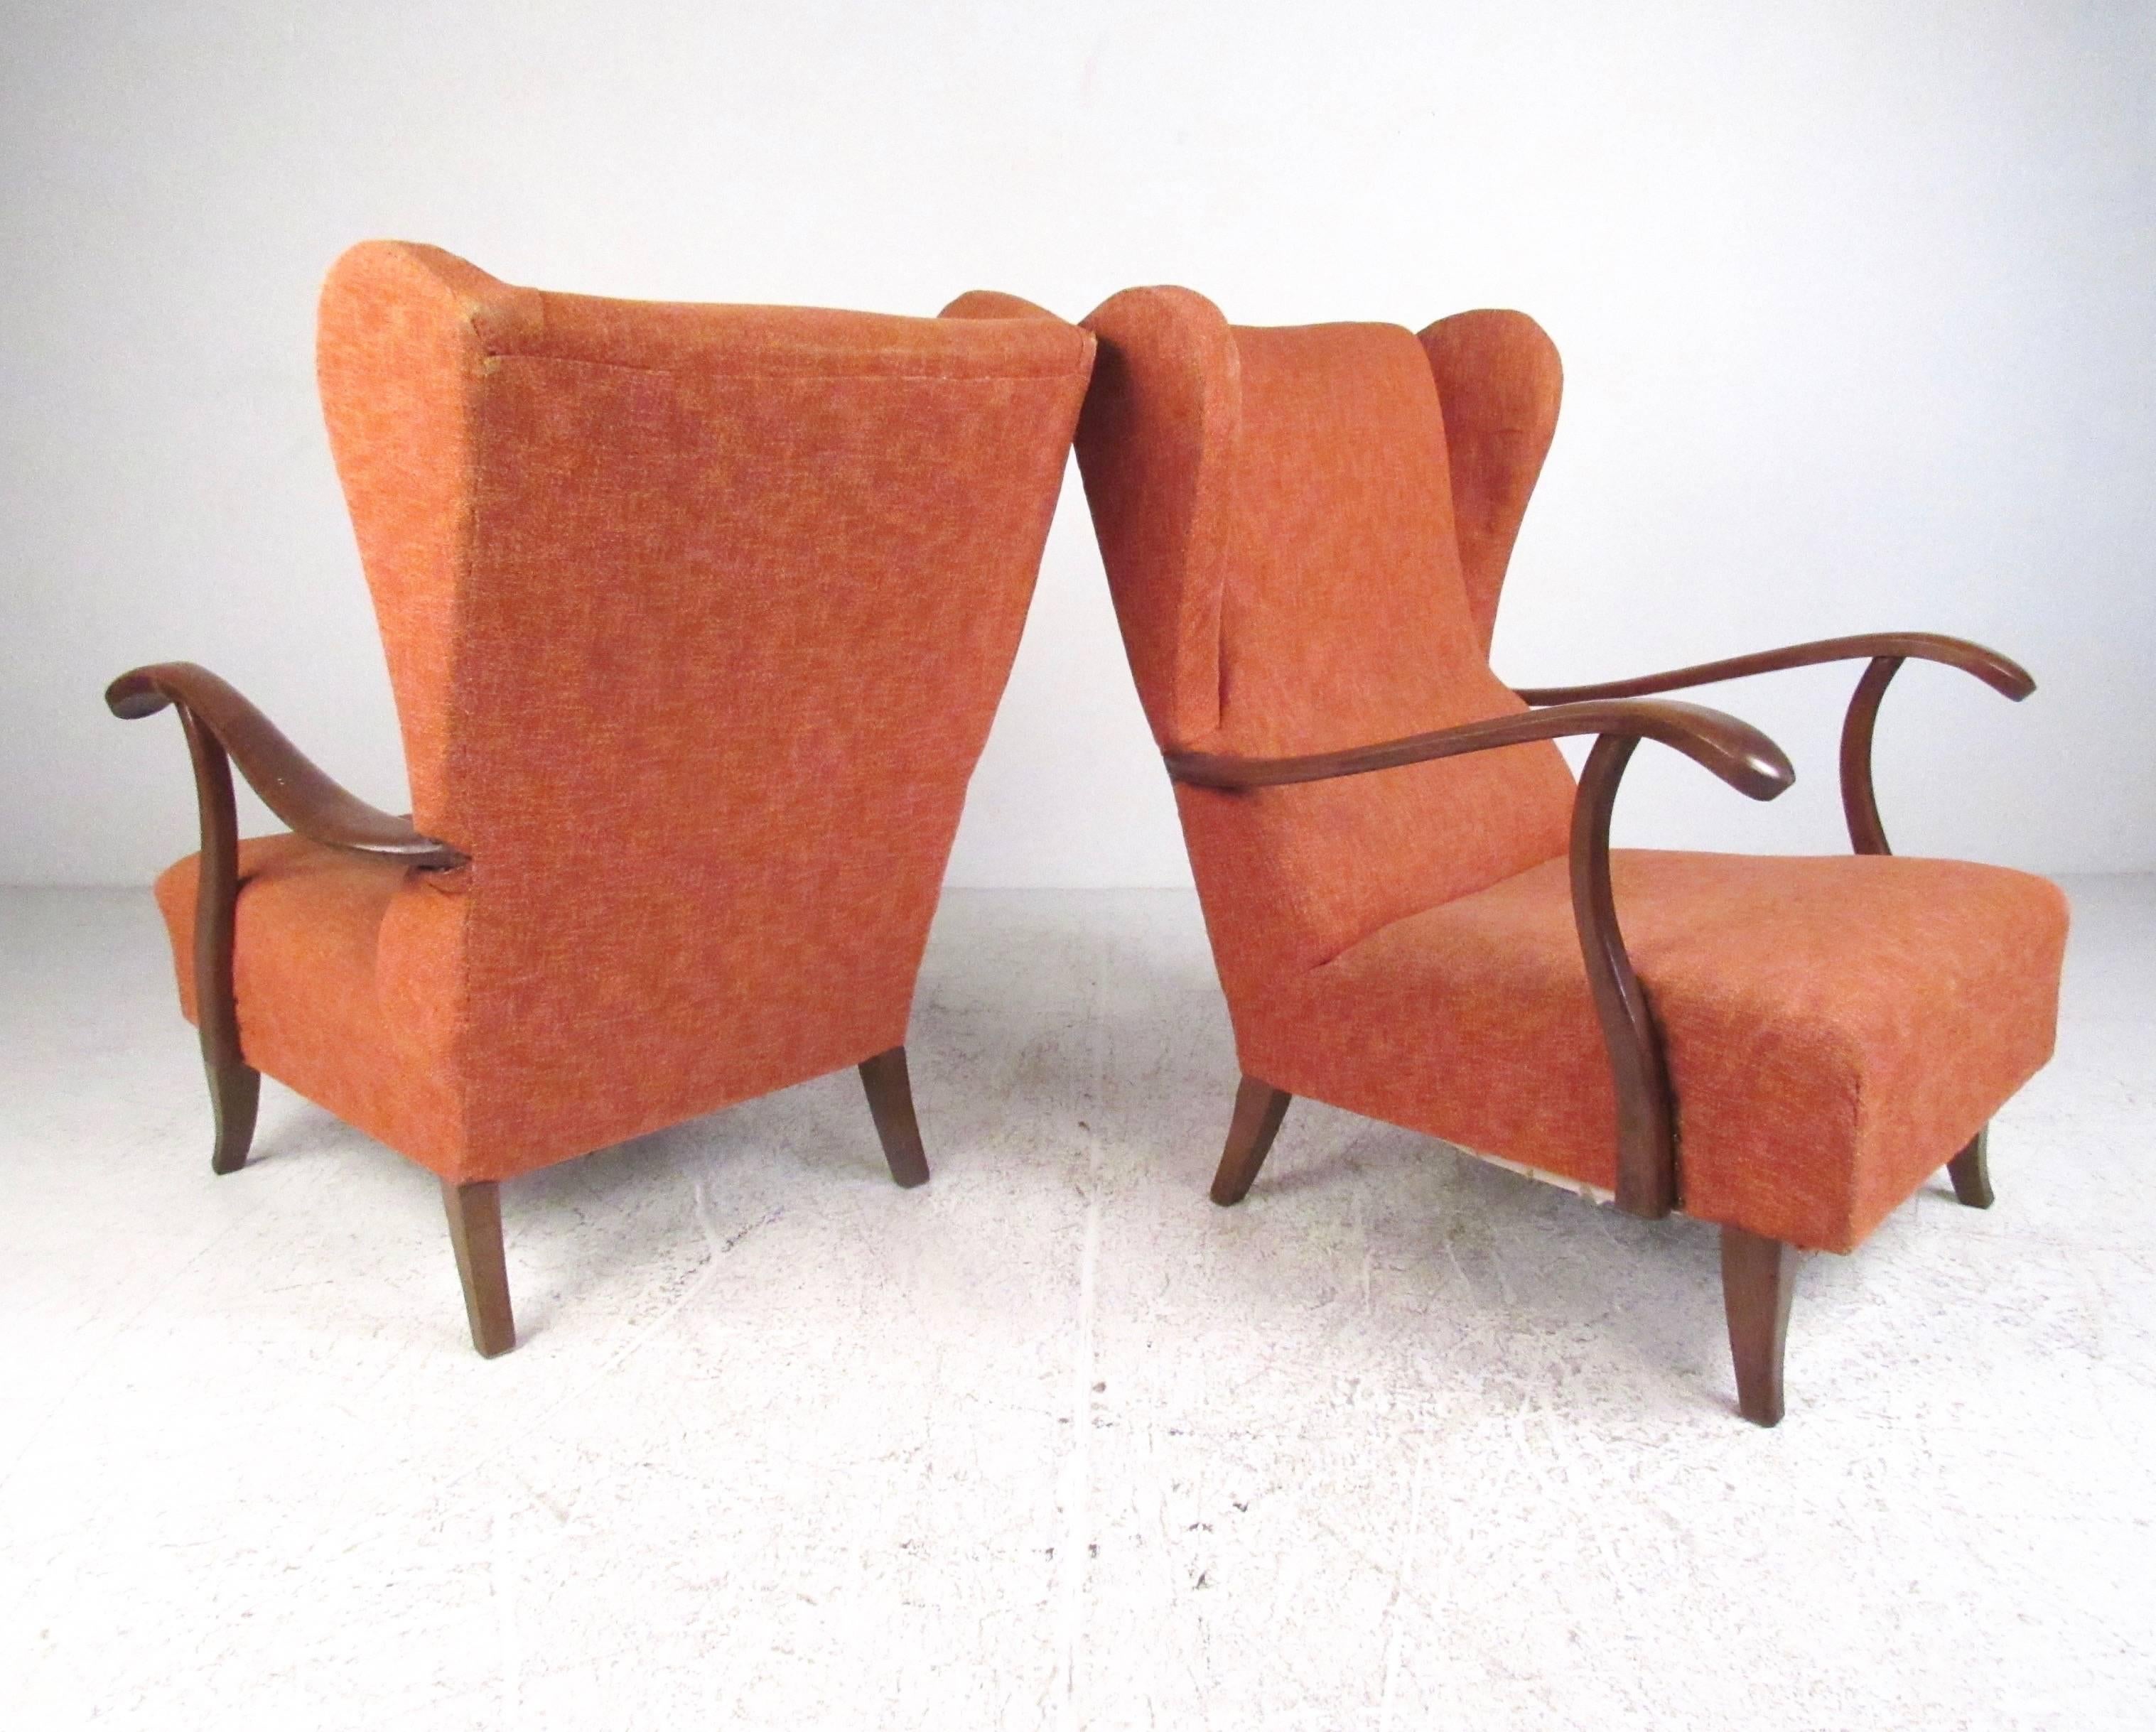 This stylish pair of high back Paolo Buffa attributed armchairs feature sculpted wingback design and elegant hardwood arms. Tapered legs and unique vintage fabric add to the Mid-Century Modern charm of these Italian lounge chairs. Please confirm